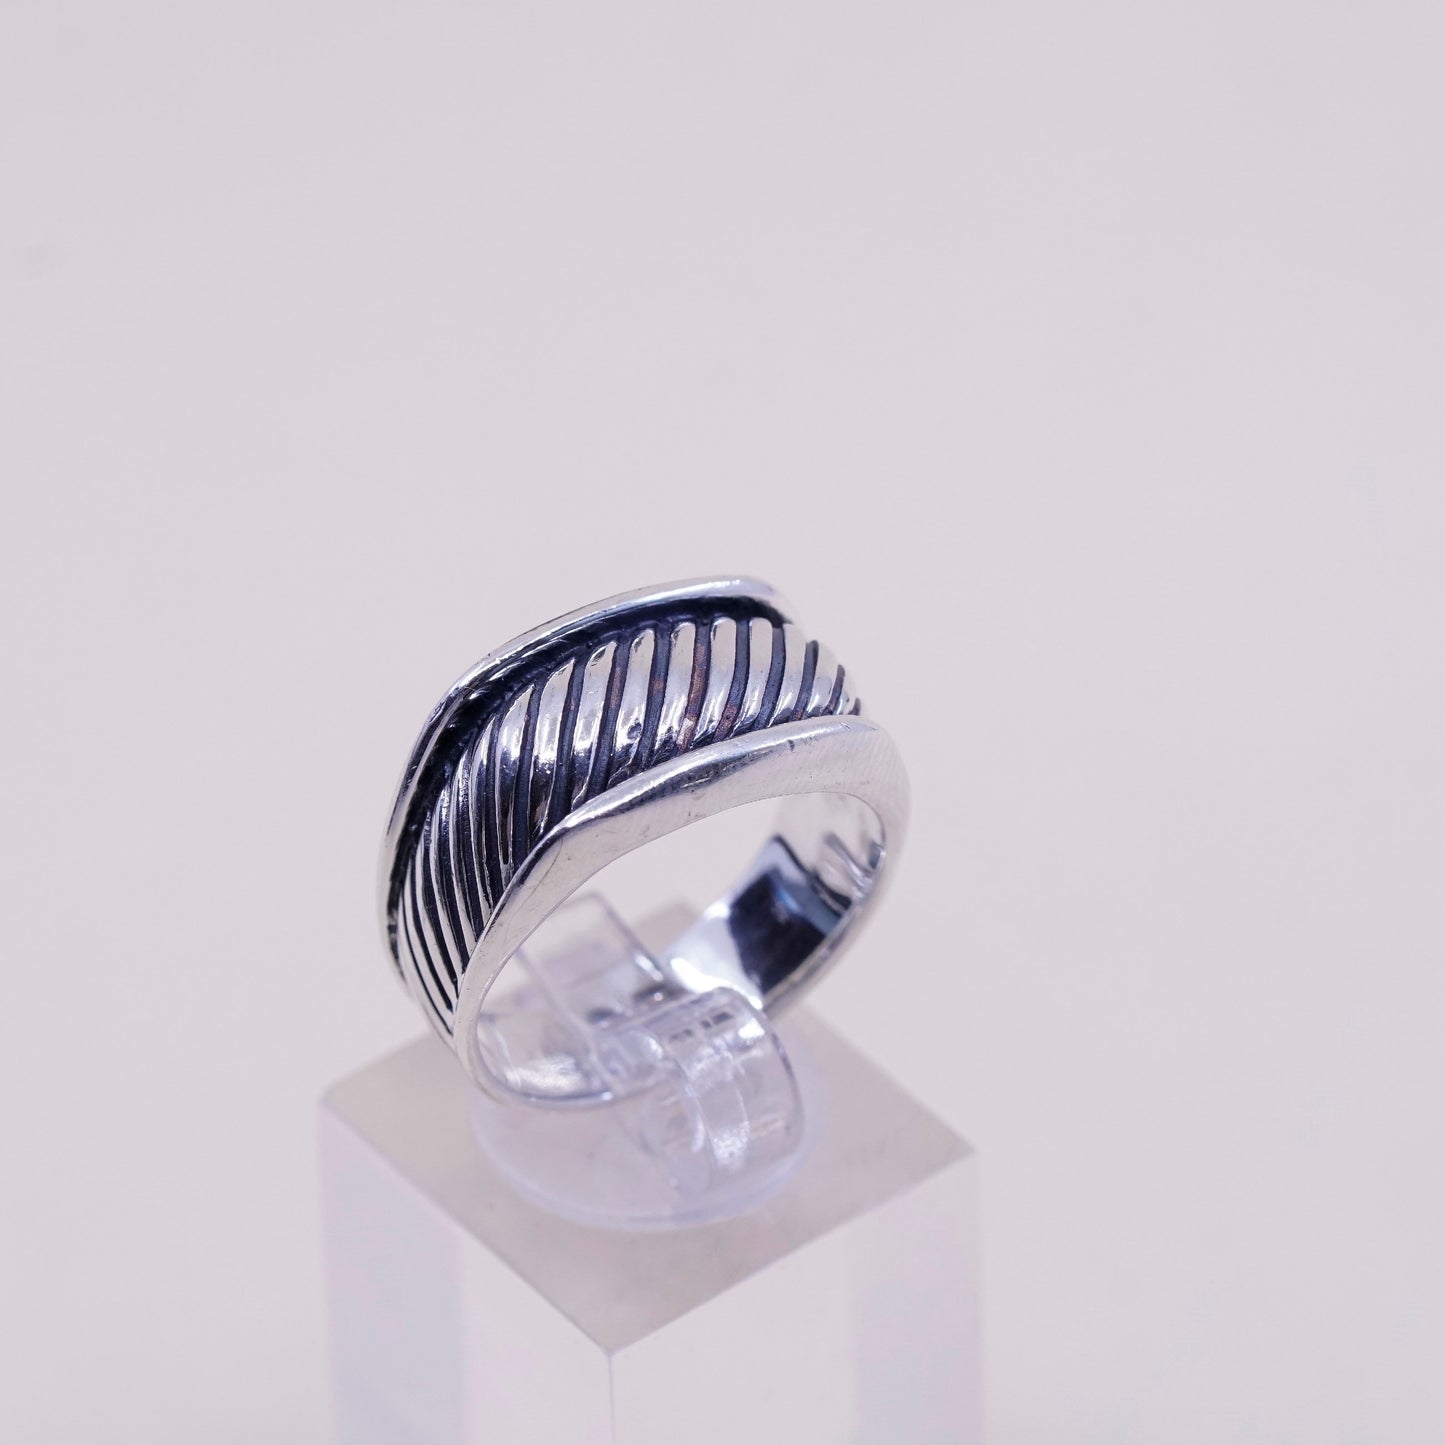 Size 9.25, vtg sterling silver handmade statement ring, 925 cable ribbed band